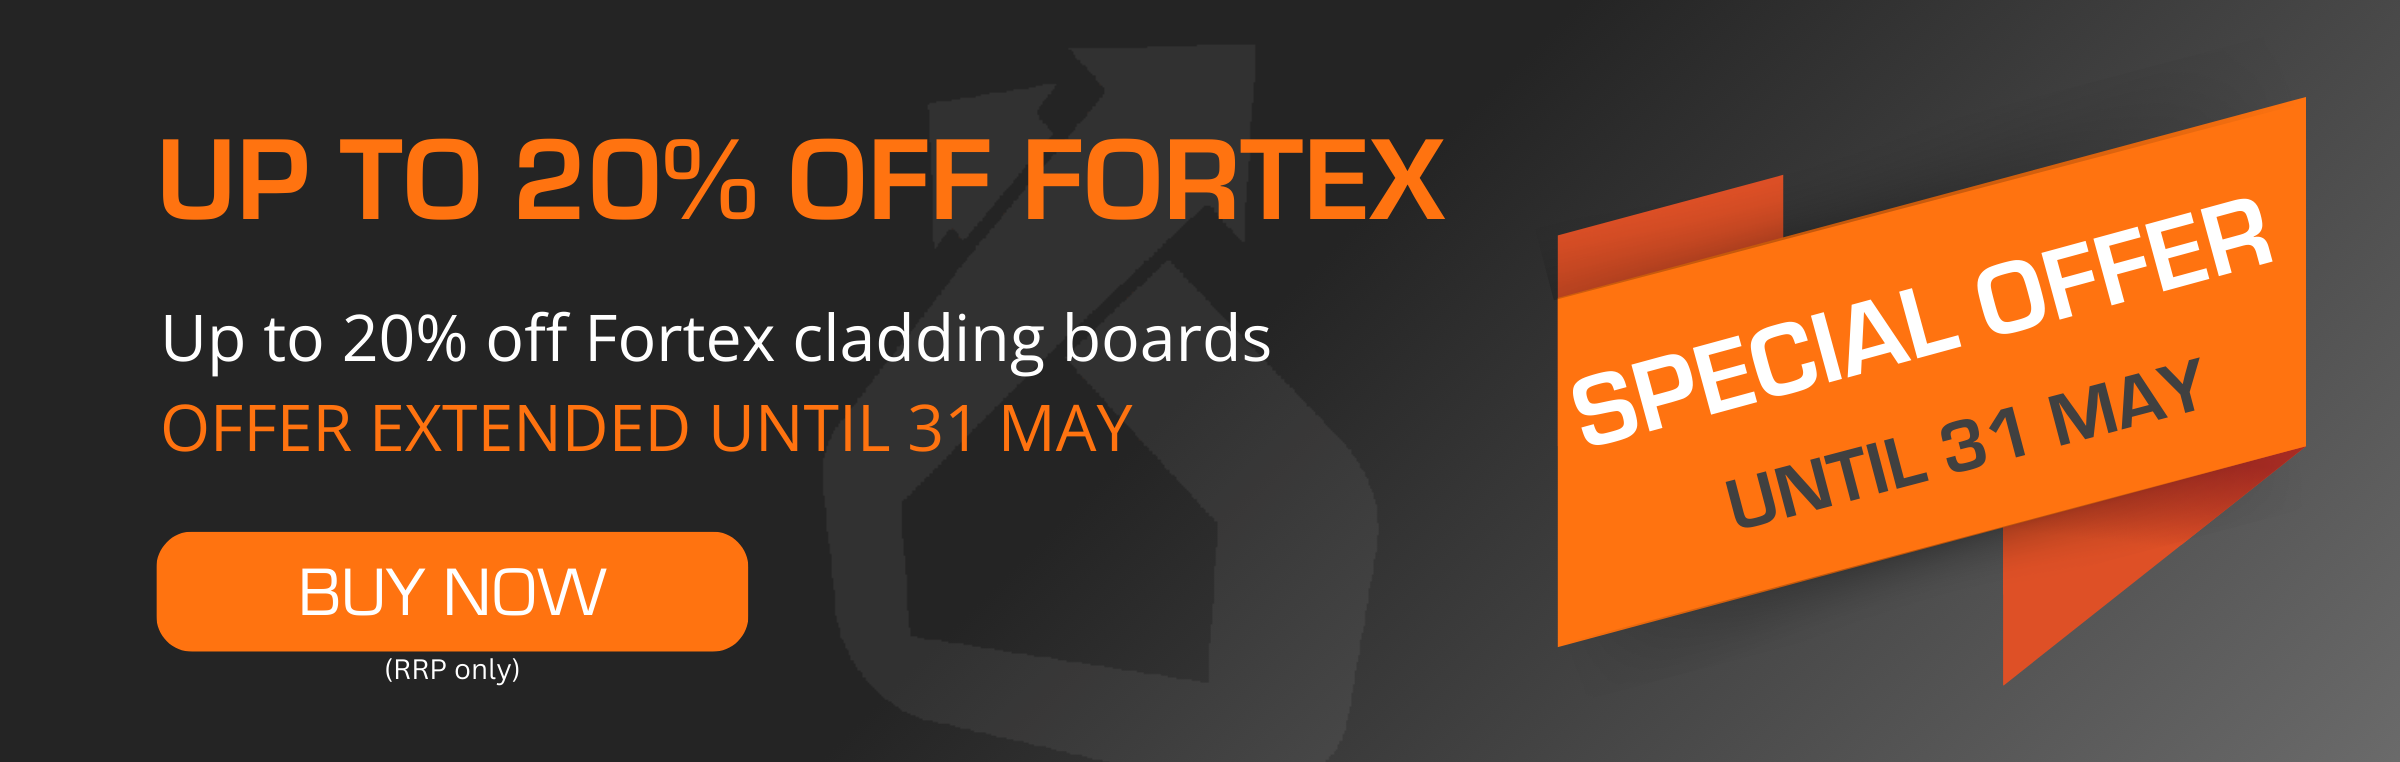 Up to 20% off Fortex